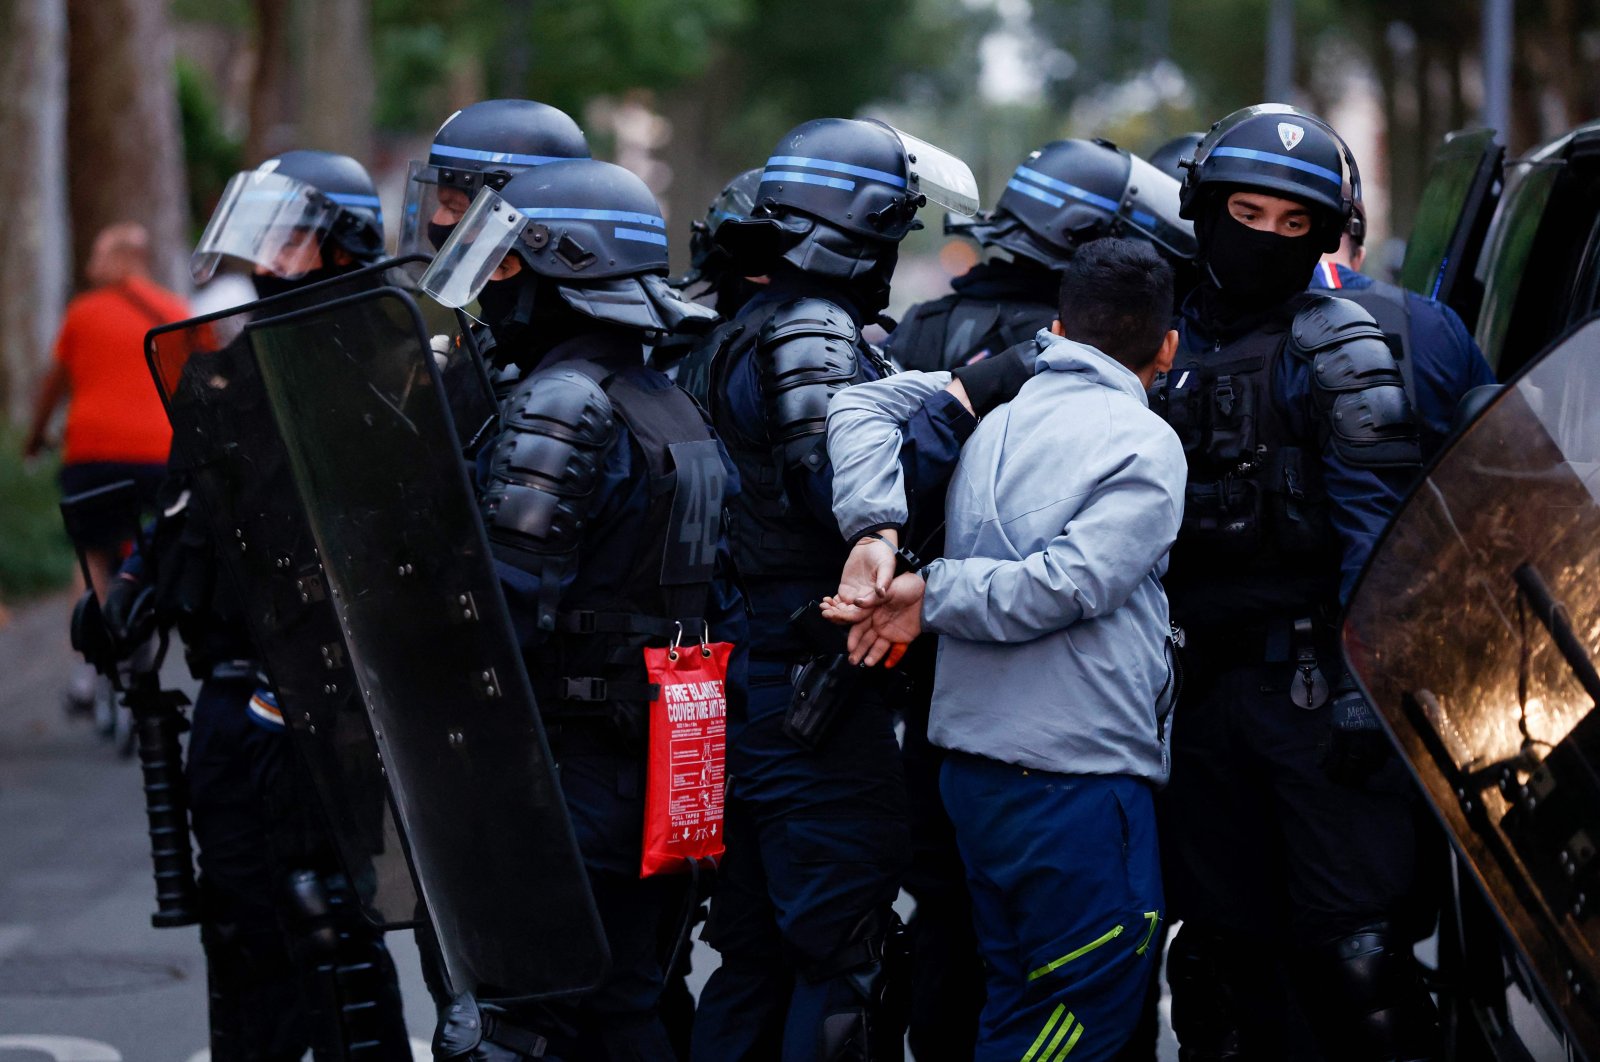 Police officers arrest a man during protests two days after a teenager was shot dead during a police traffic stop in the Paris suburb of Nanterre, Lille, France, June 29, 2023. (AFP Photo)